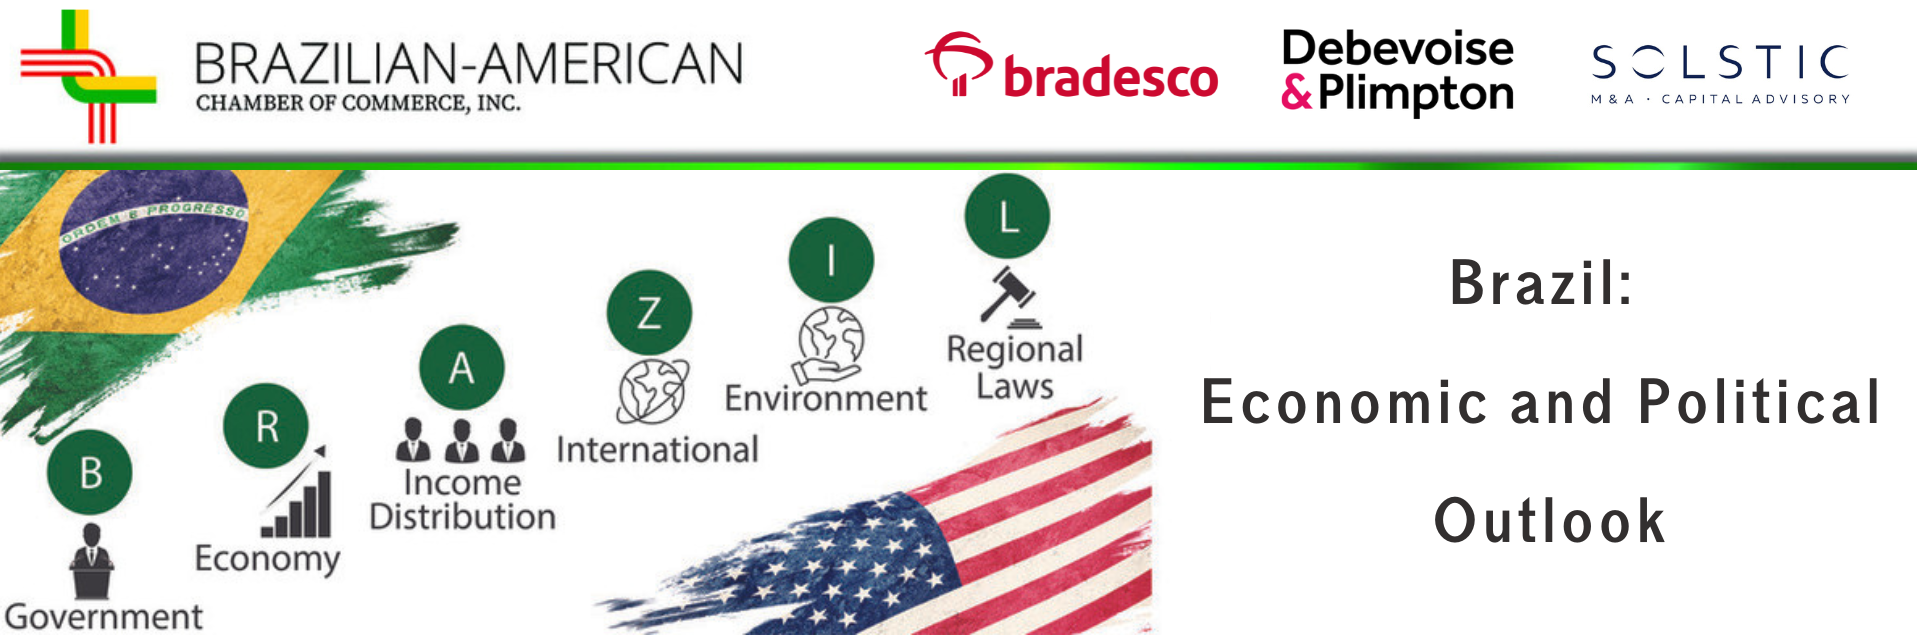 2022 Brazil Economic and Political Outlook BrazilianAmerican Chamber of Commerce